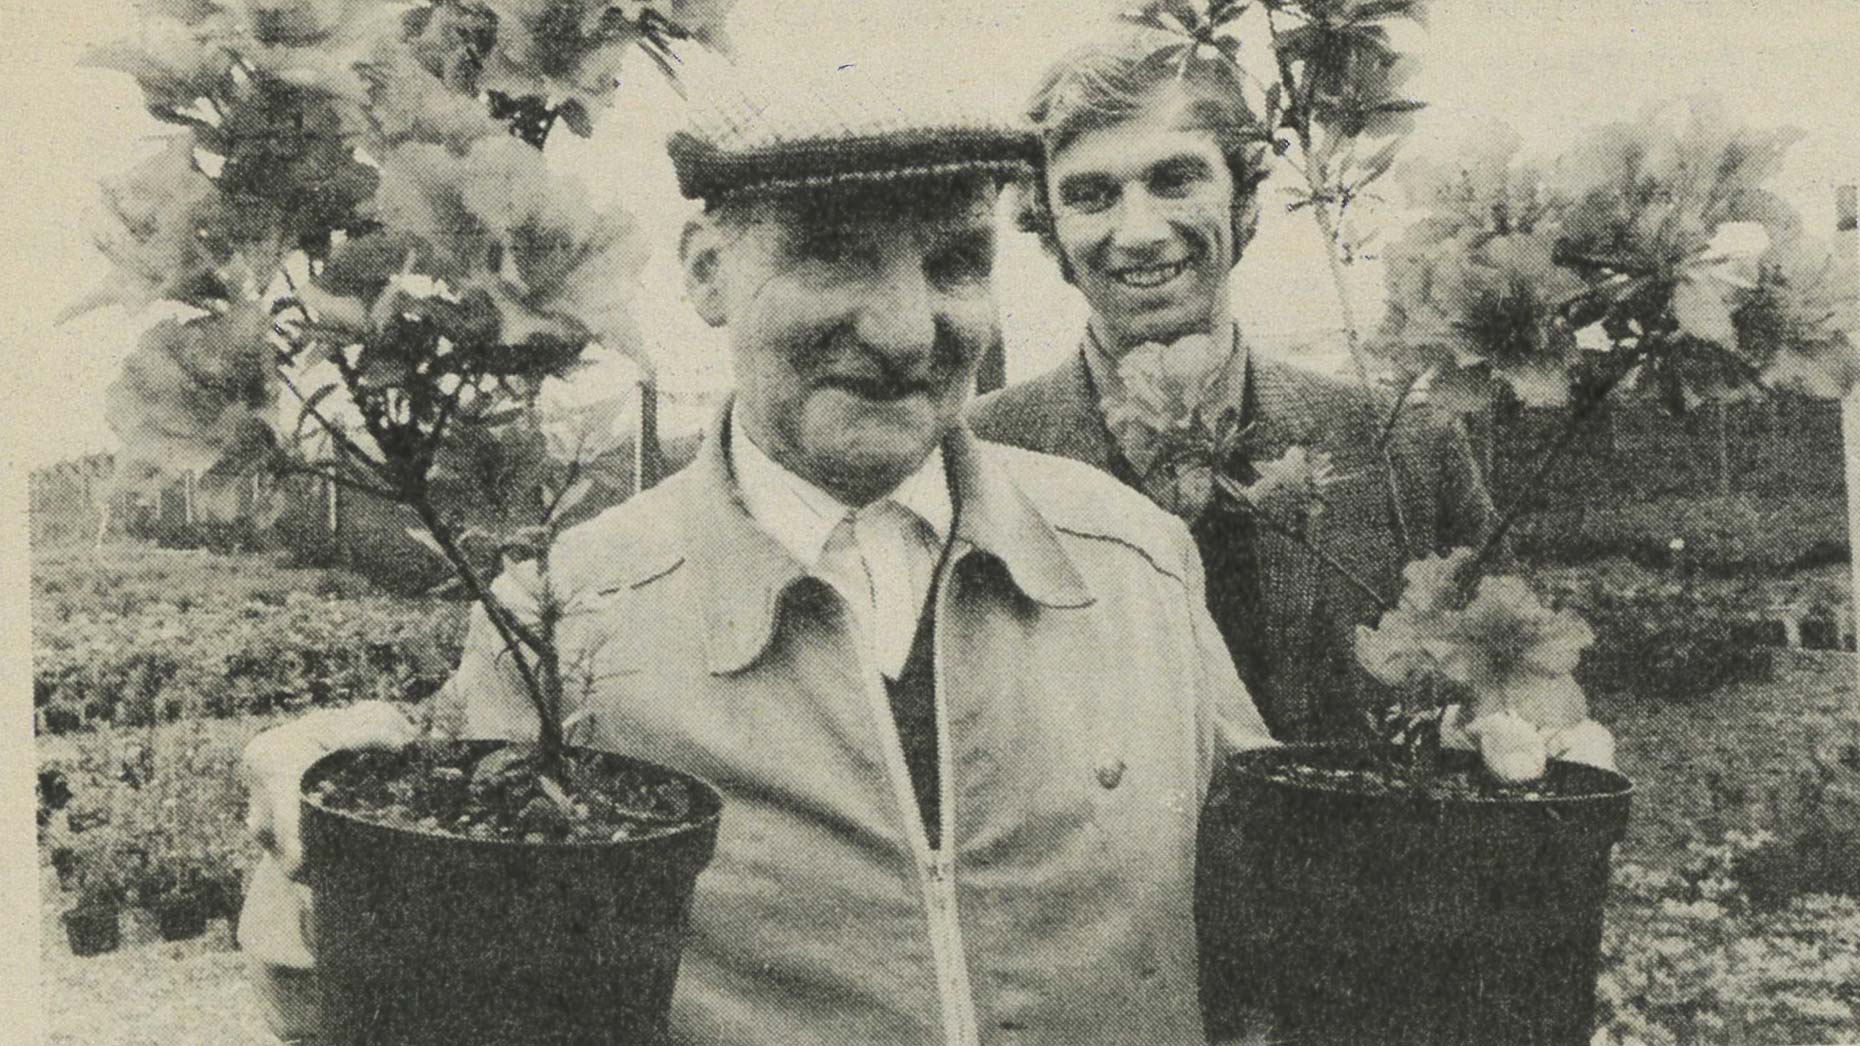 Fred Smith, Trevor's father, worked for the company for 51 years. The family's name was continued at the company by Trevor (pictured behind). Photo taken by the Lincs Chronicle in 1984, marking Fred's retirement.